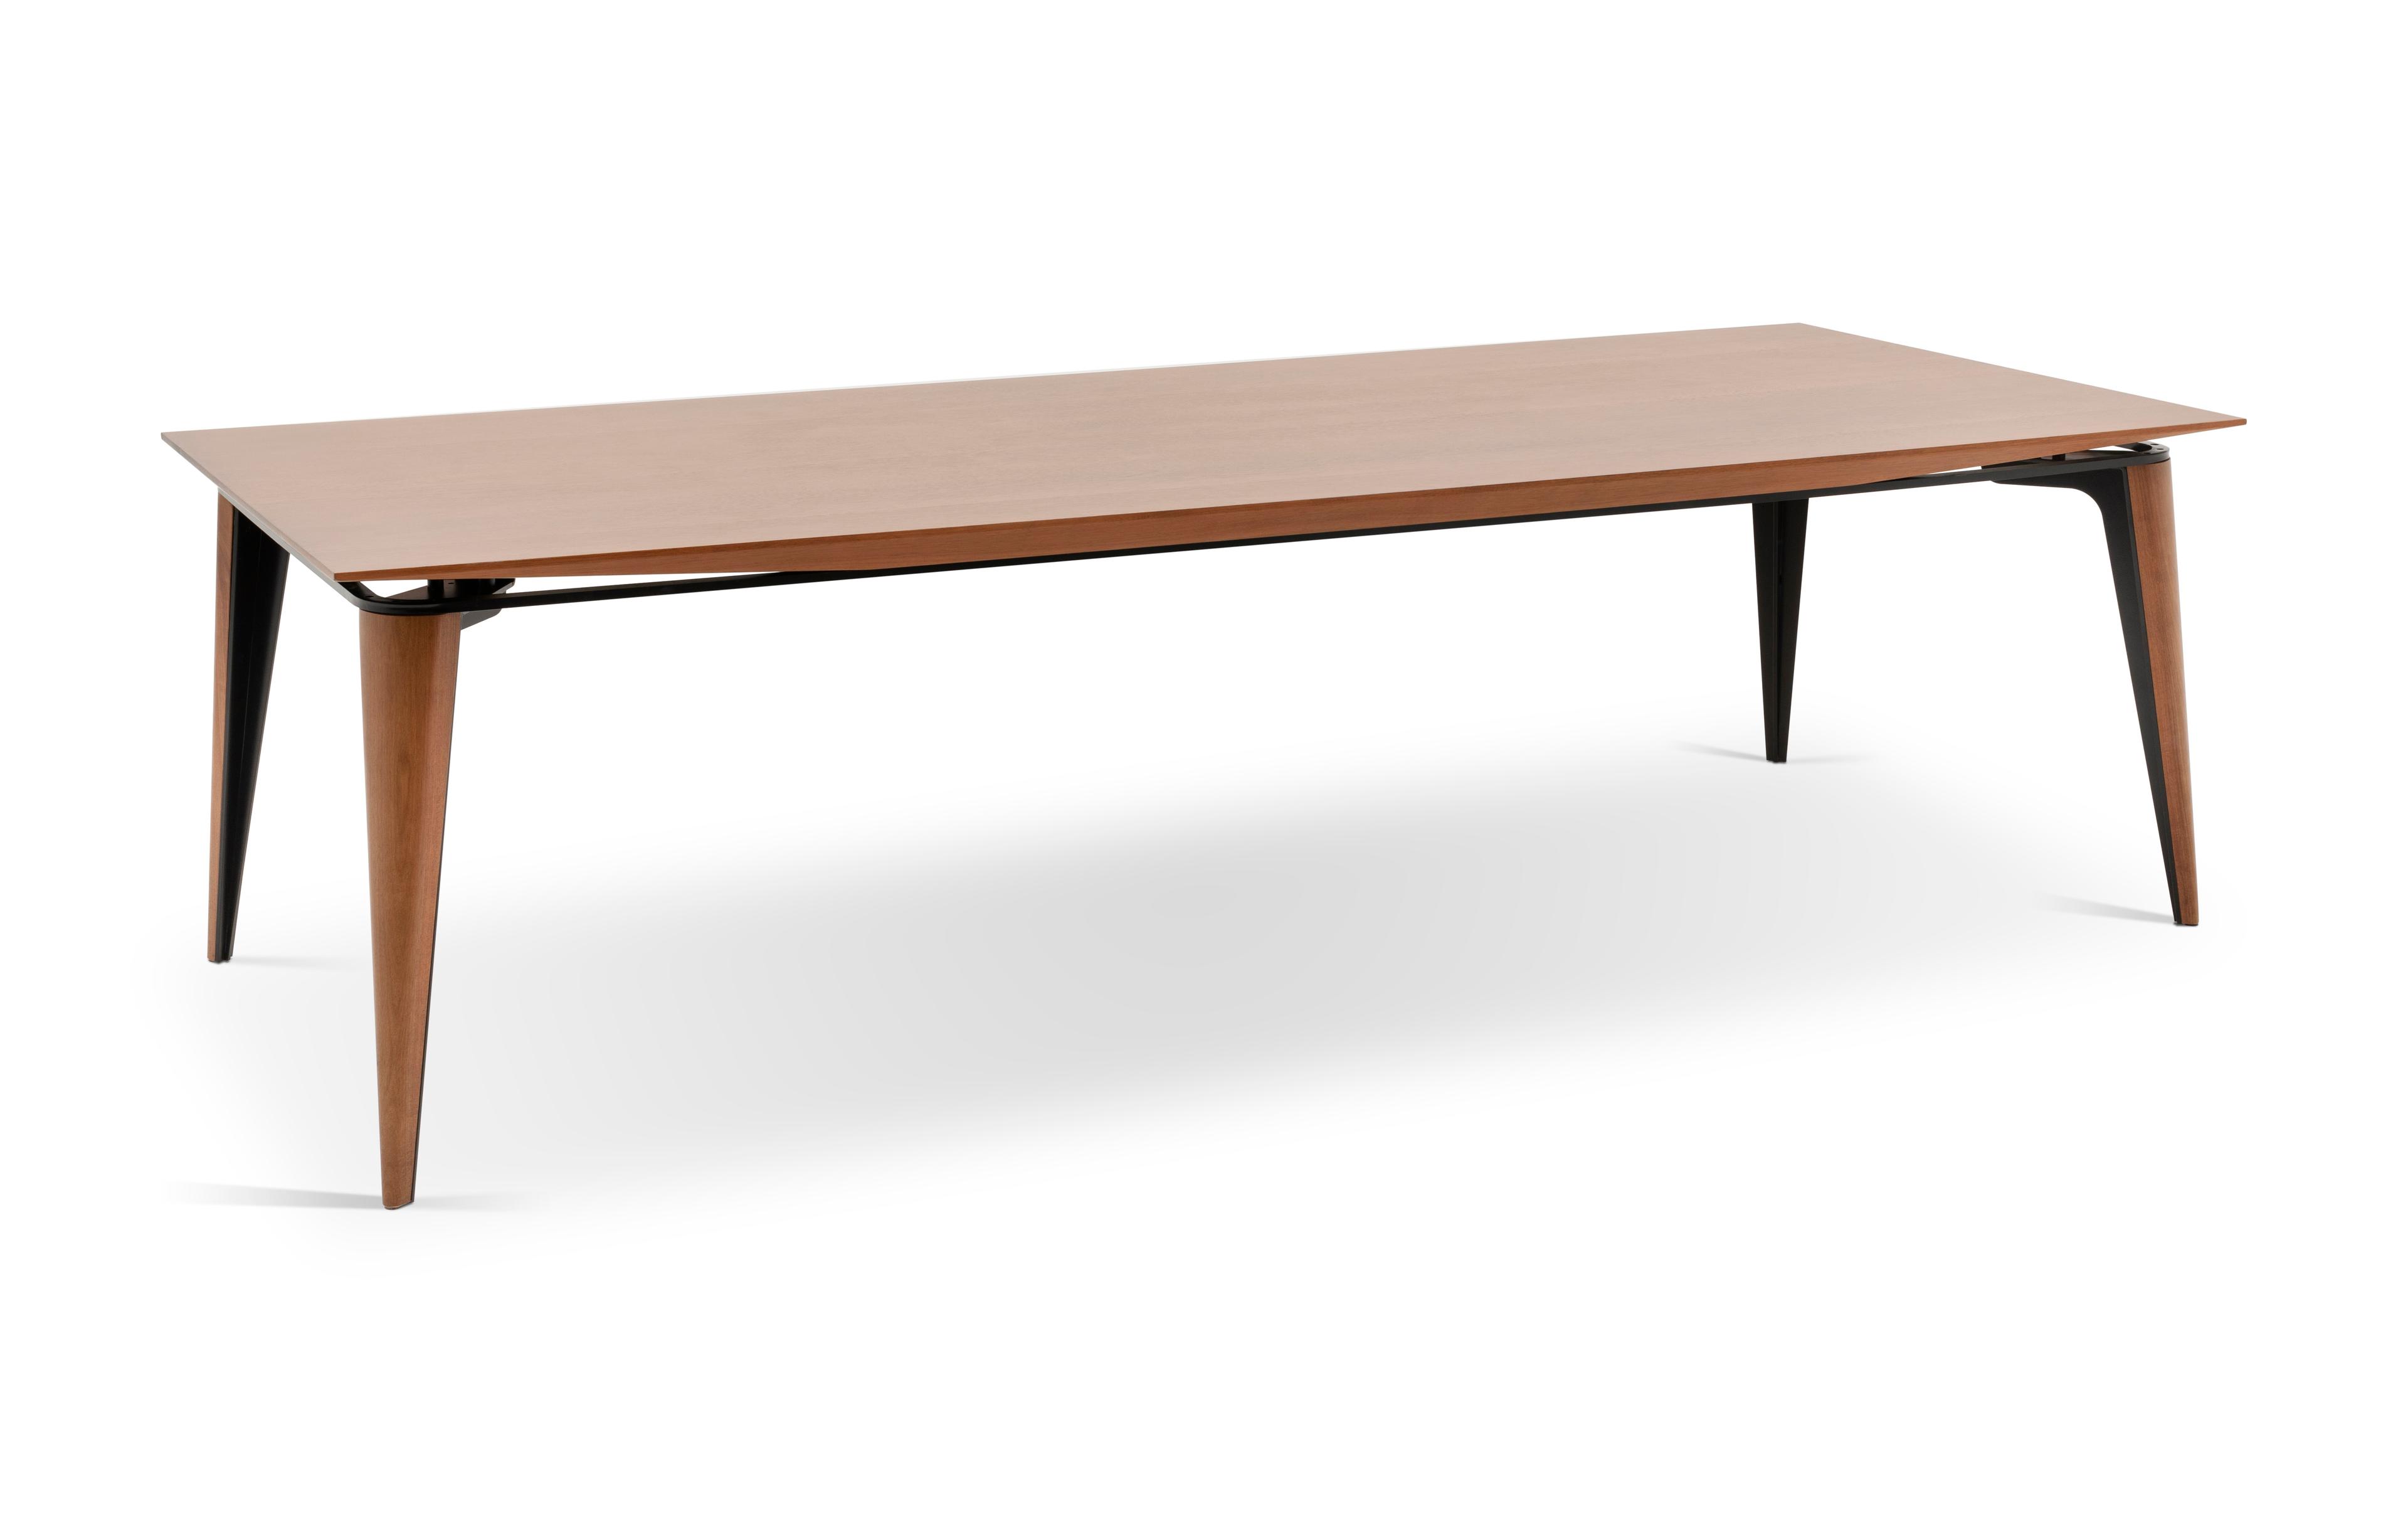 ANTARES DINING TABLE WOODEN TOP